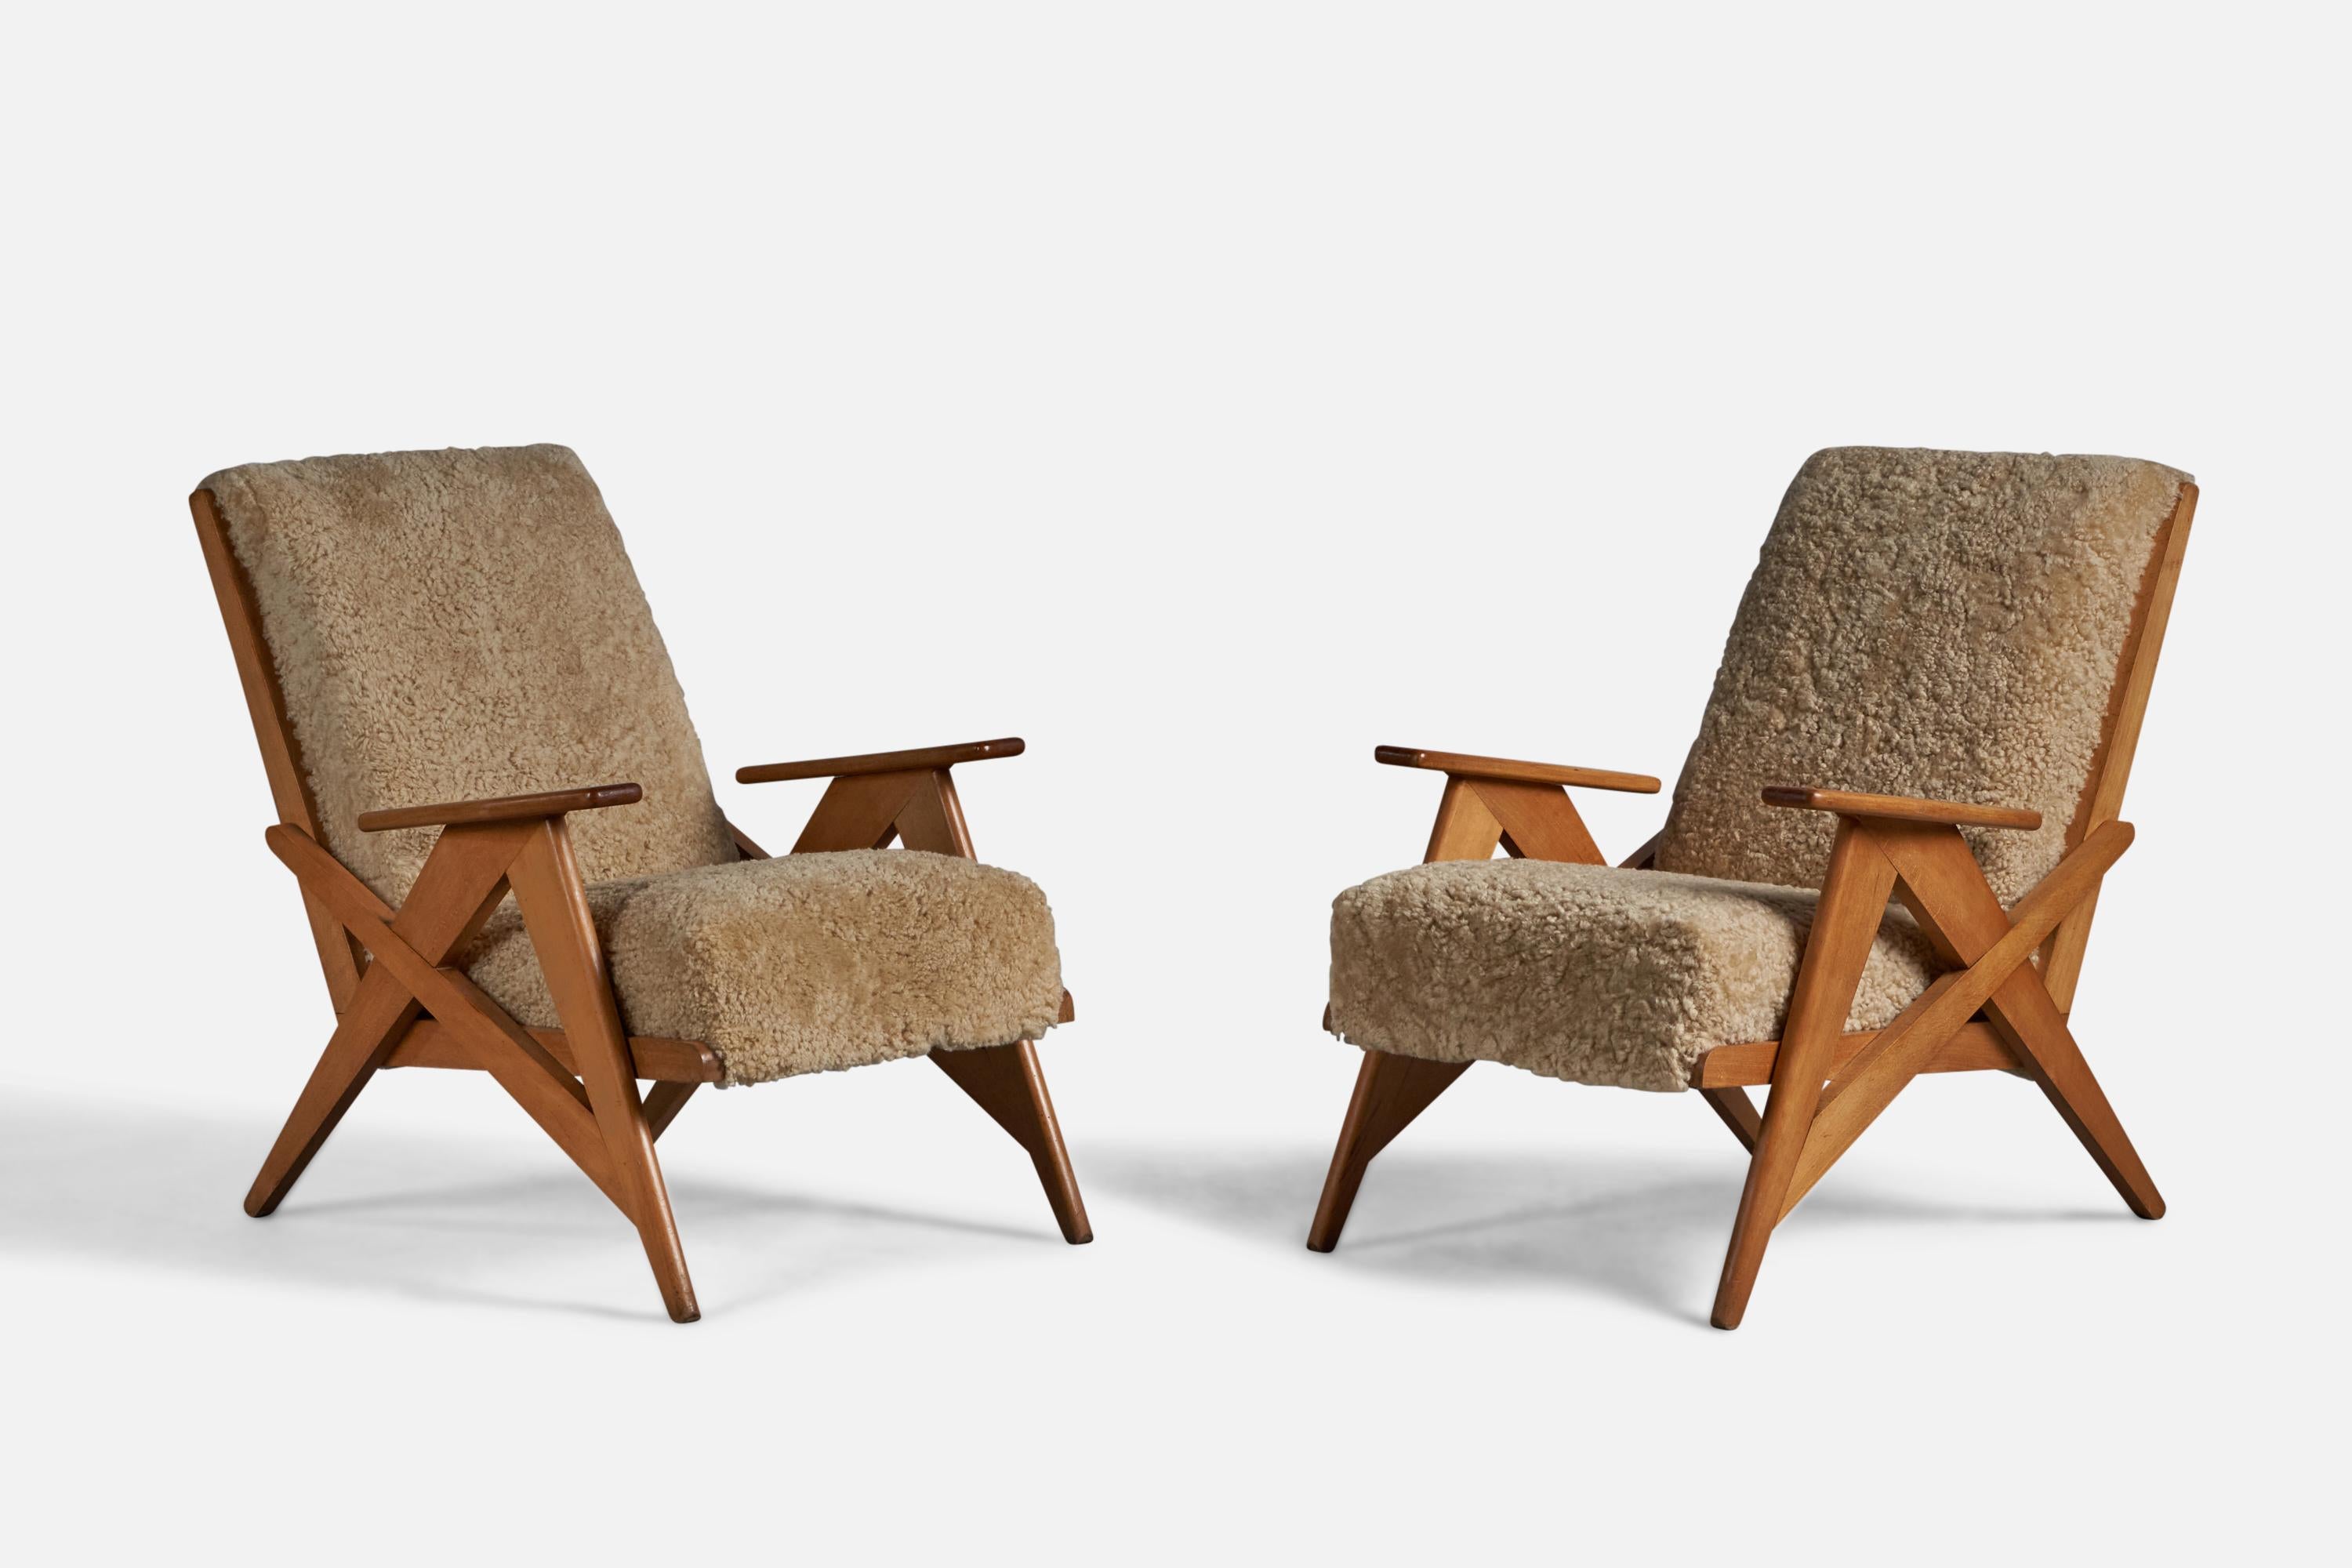 A pair of solid oak and beige shearling lounge chairs designed and produced in France, 1950s.

17.5